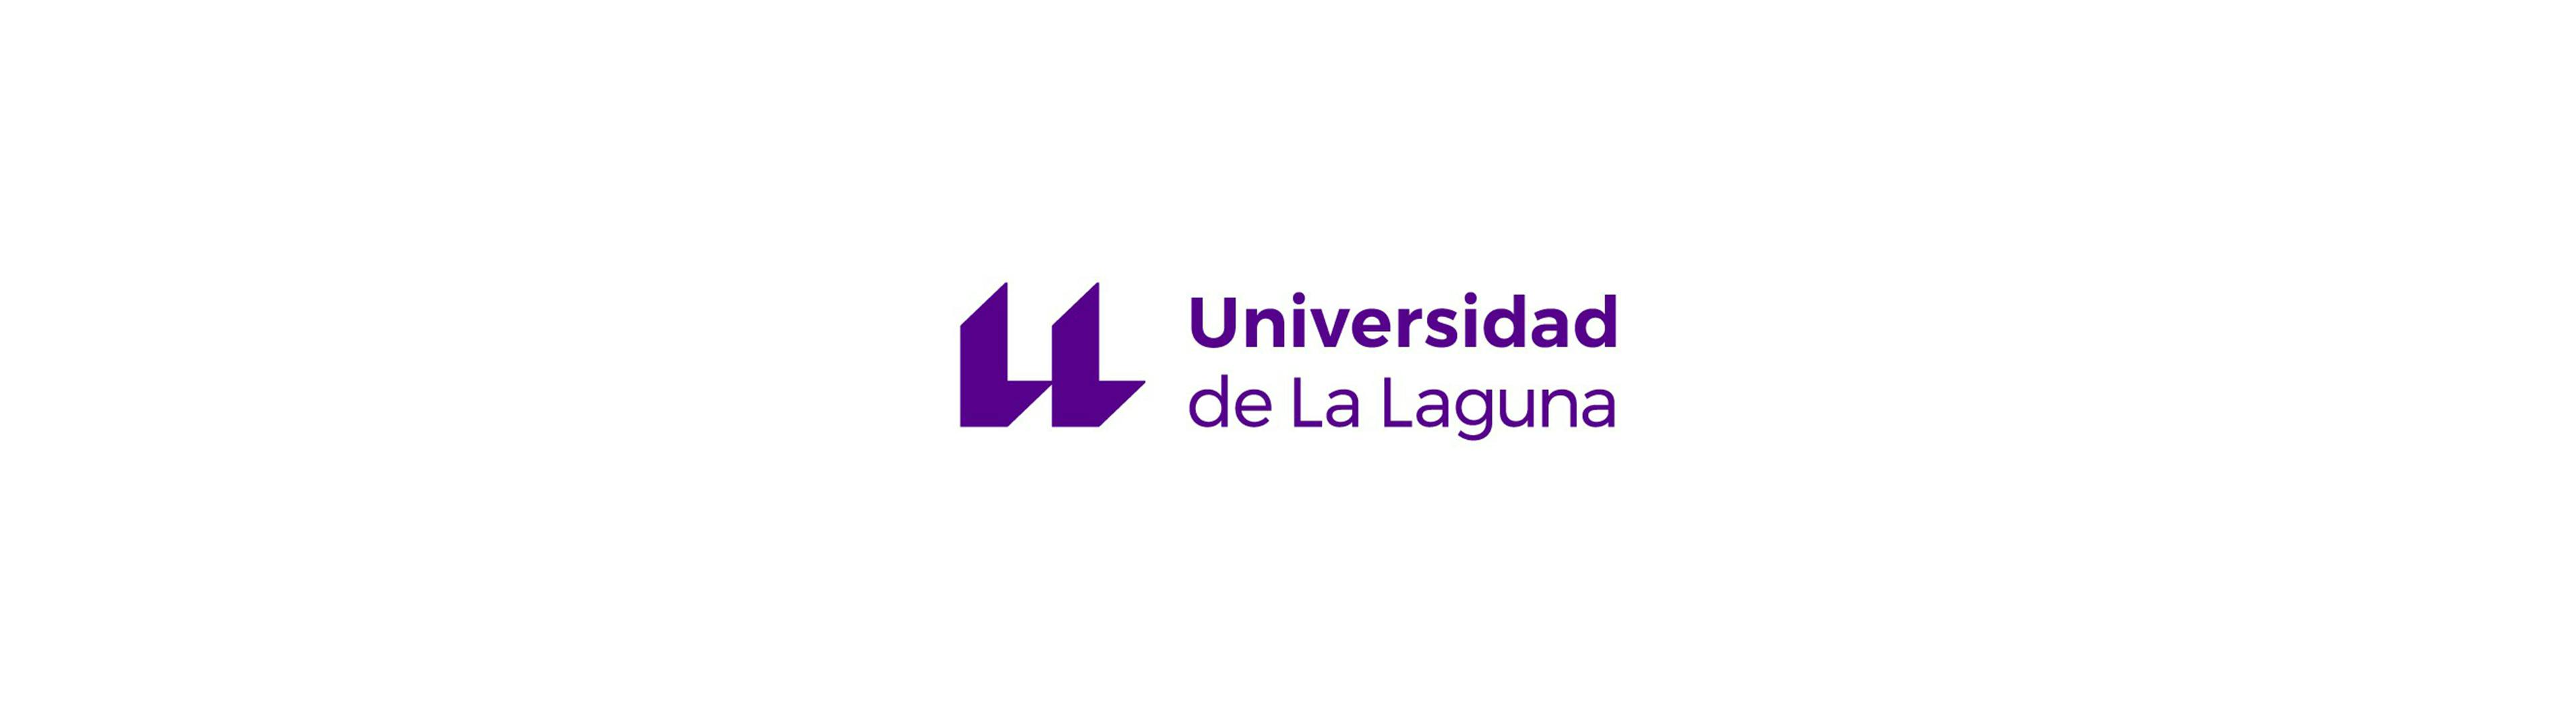 Logo of the University of La Laguna: two side-by-side "L's" resembling two open quotation marks, with the words "Universidad de La Laguna" next to them.